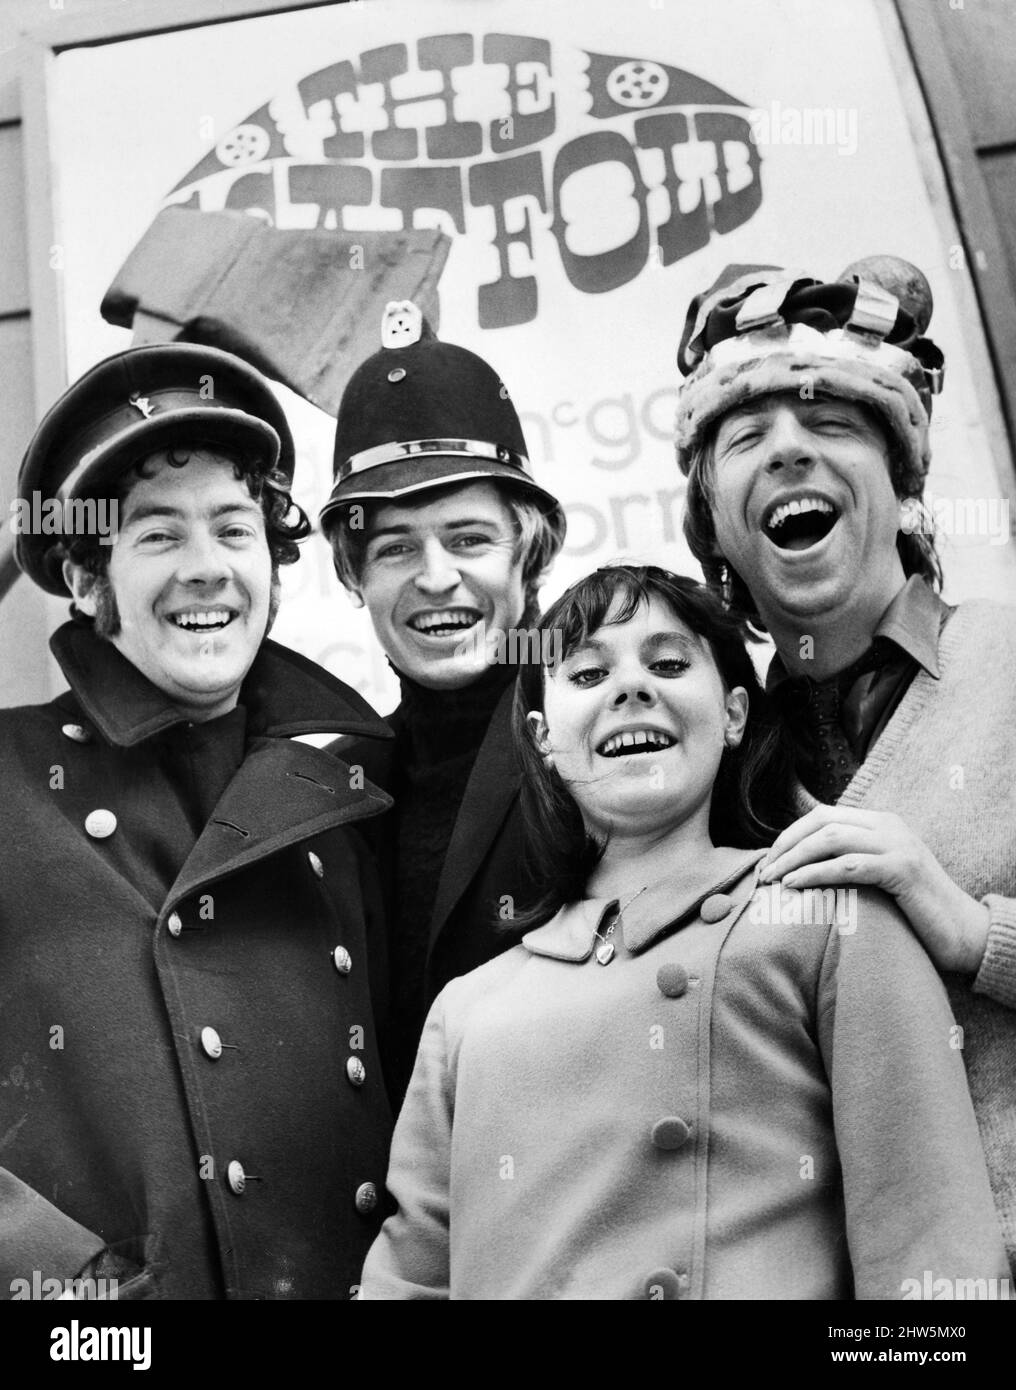 Members of theLiverpool pop group The Scaffold left to right: John Gorman, Mike McCartney (Mike MCGear) and Roger McGough with female fan. April 1967. Stock Photo